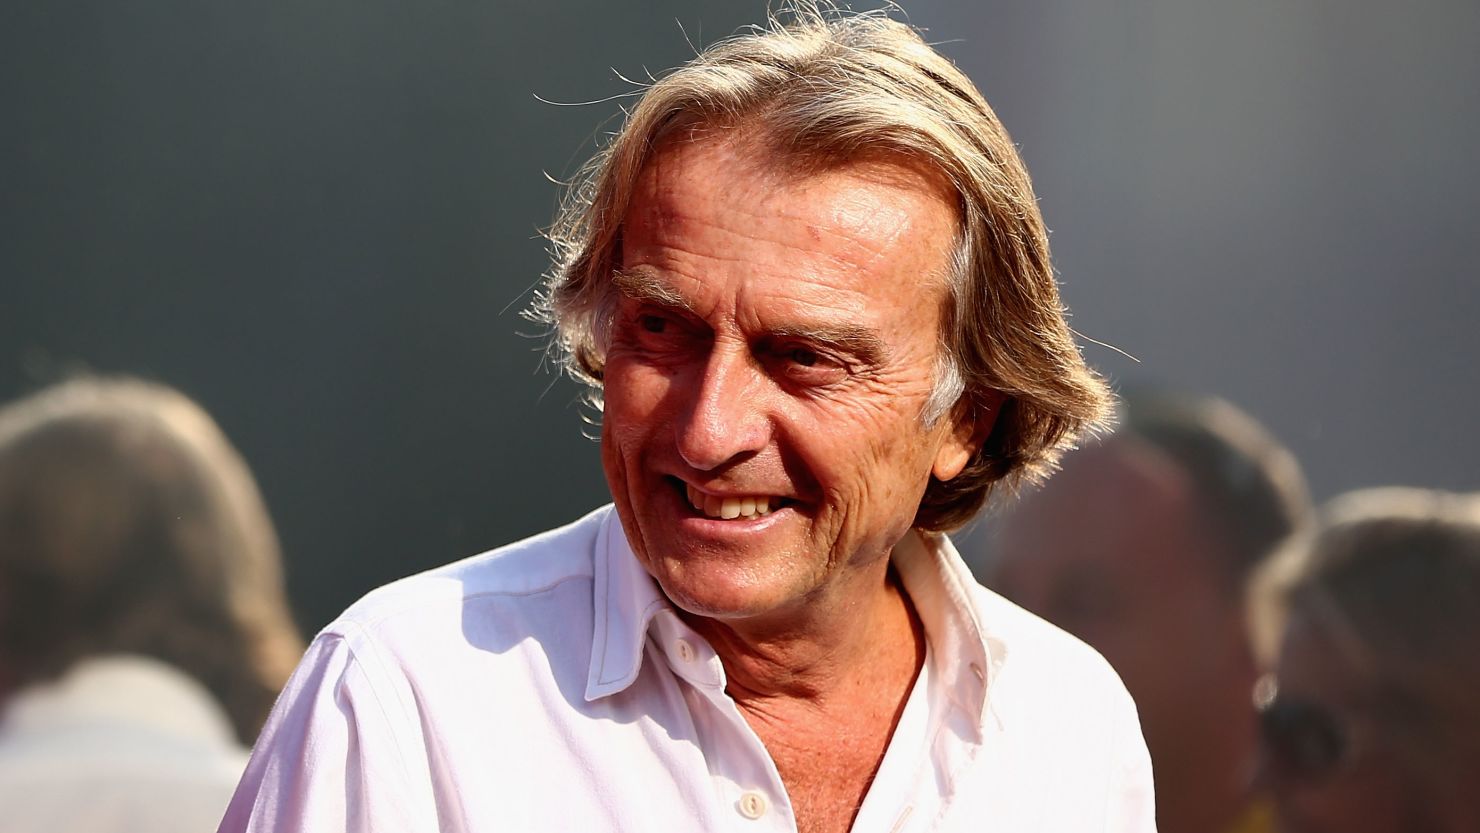 Ferrari president Luca di Montezemolo wants to see Ferrari win the drivers' title for the first time since 2007.